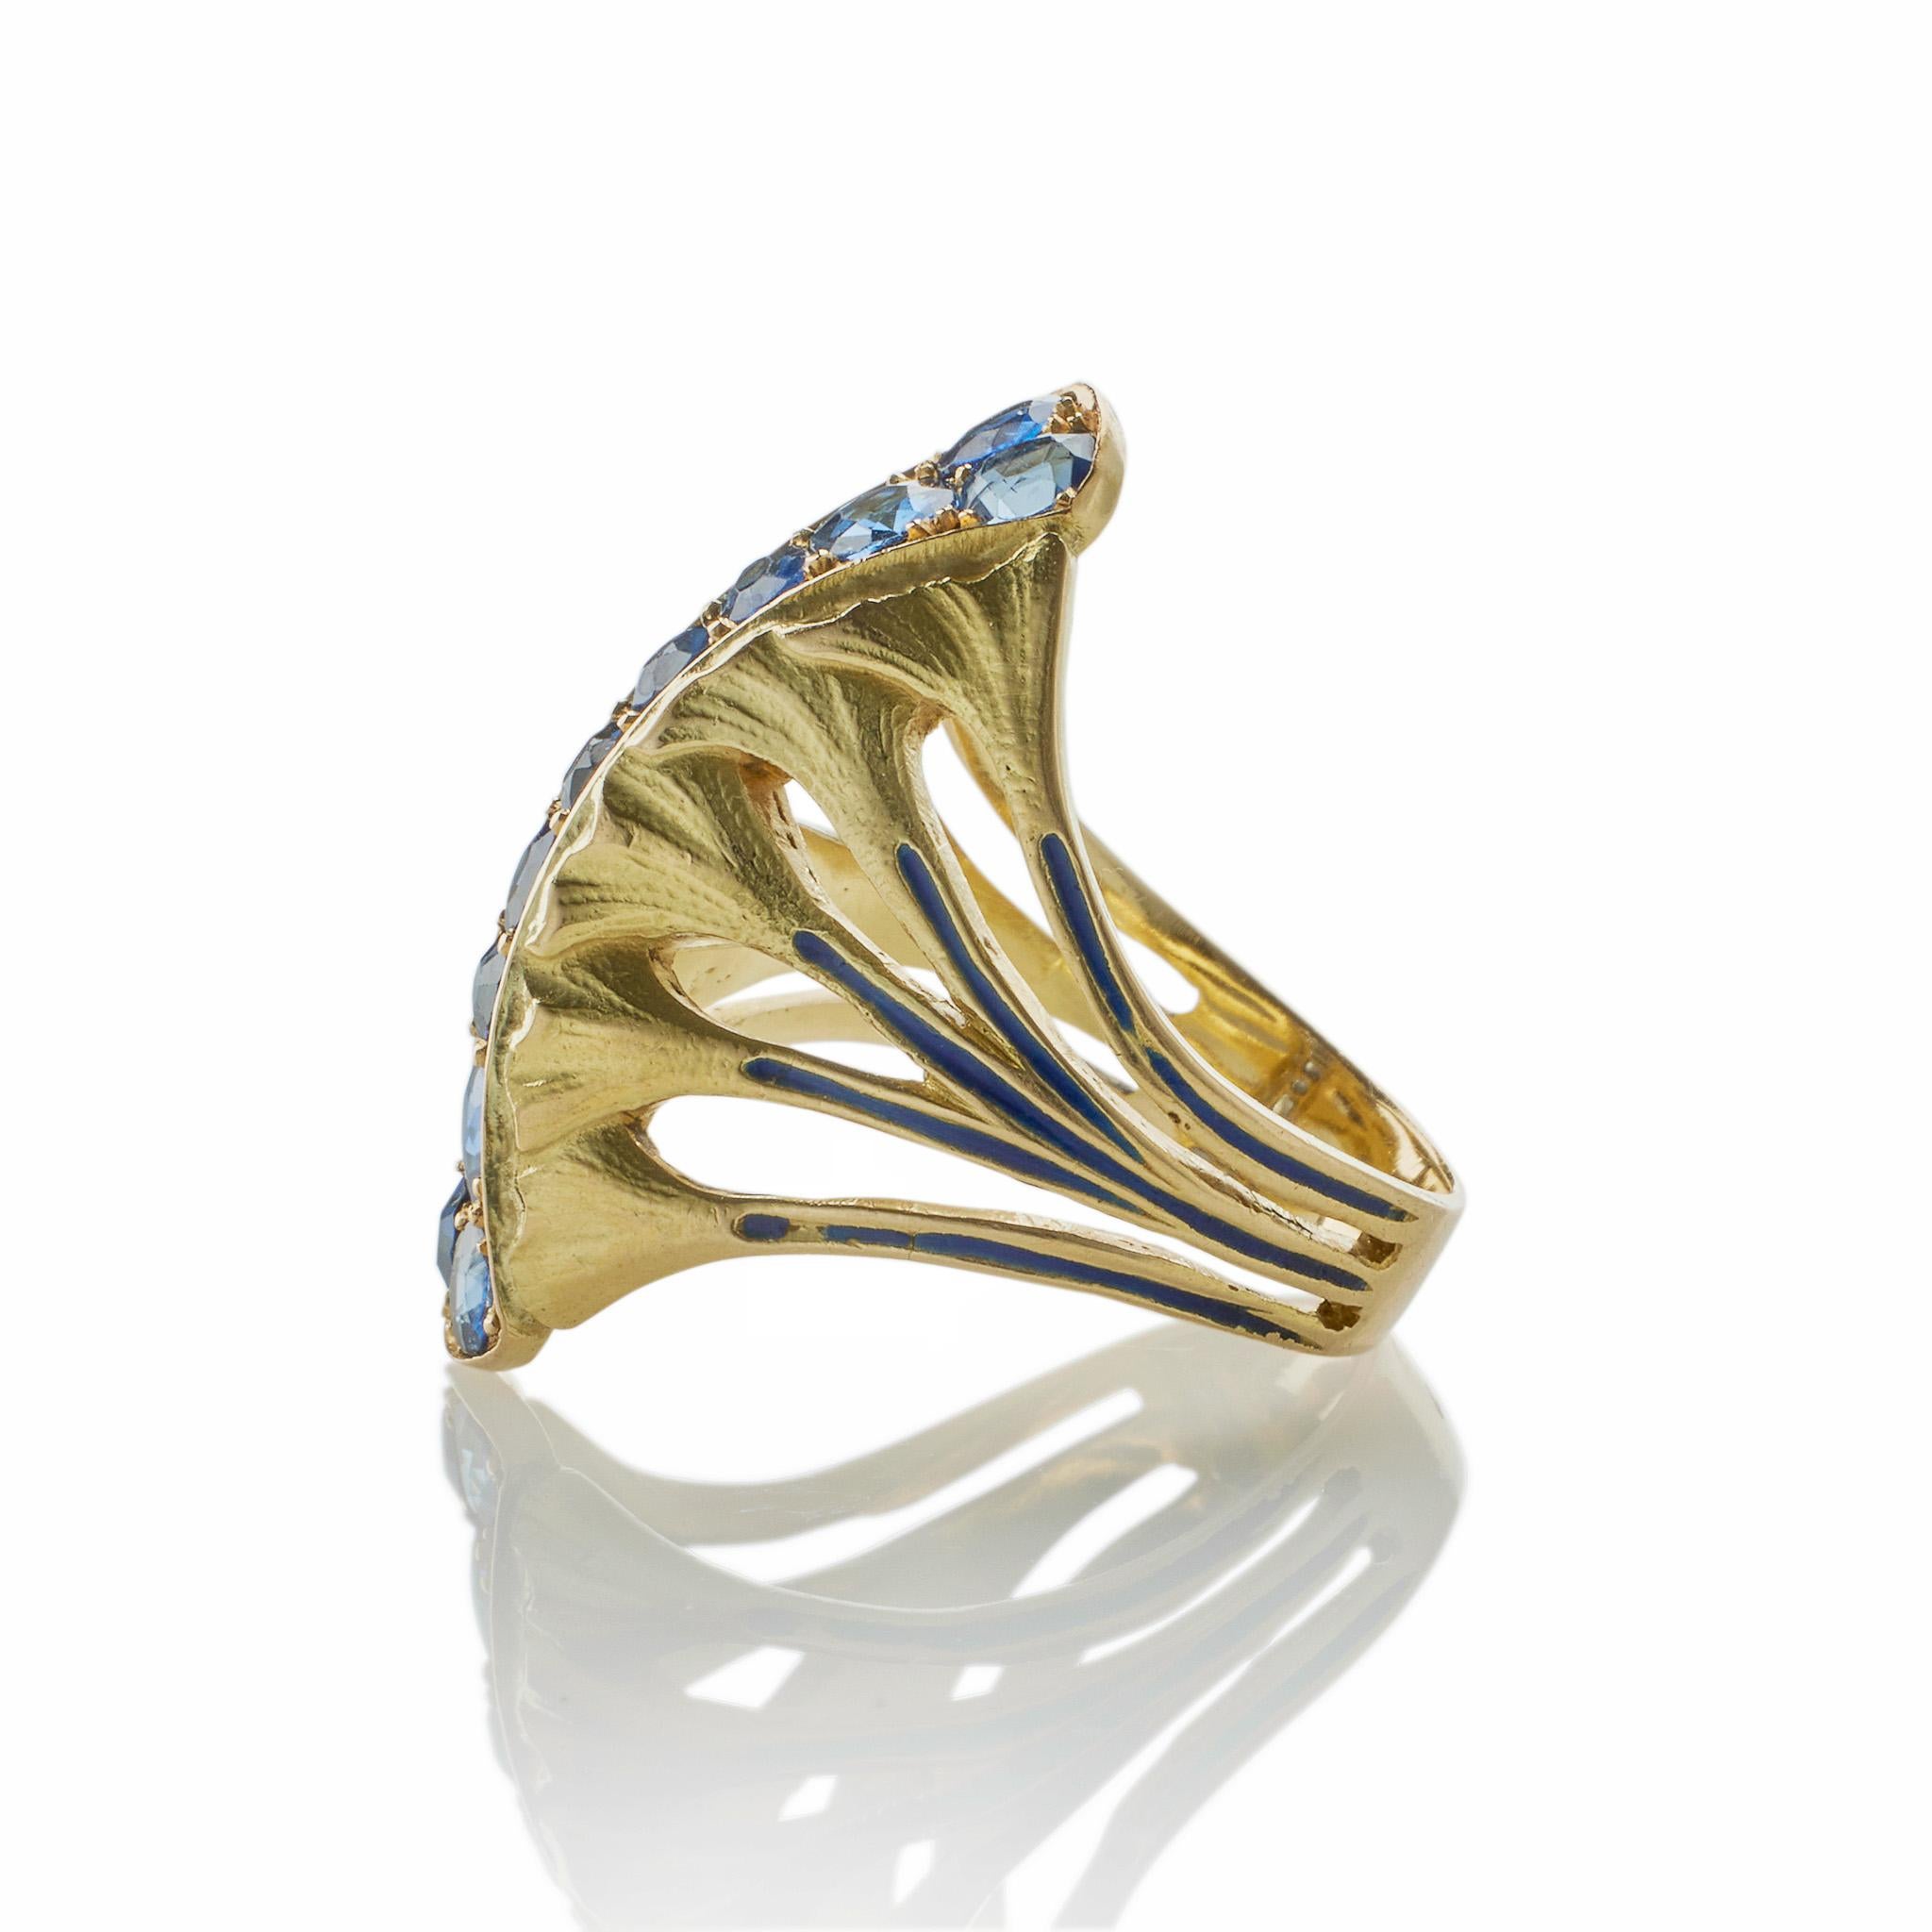 Rare Edouard de Martilly Paris Sapphire and Enamel Lotus Flower Ring In Excellent Condition For Sale In New York, NY